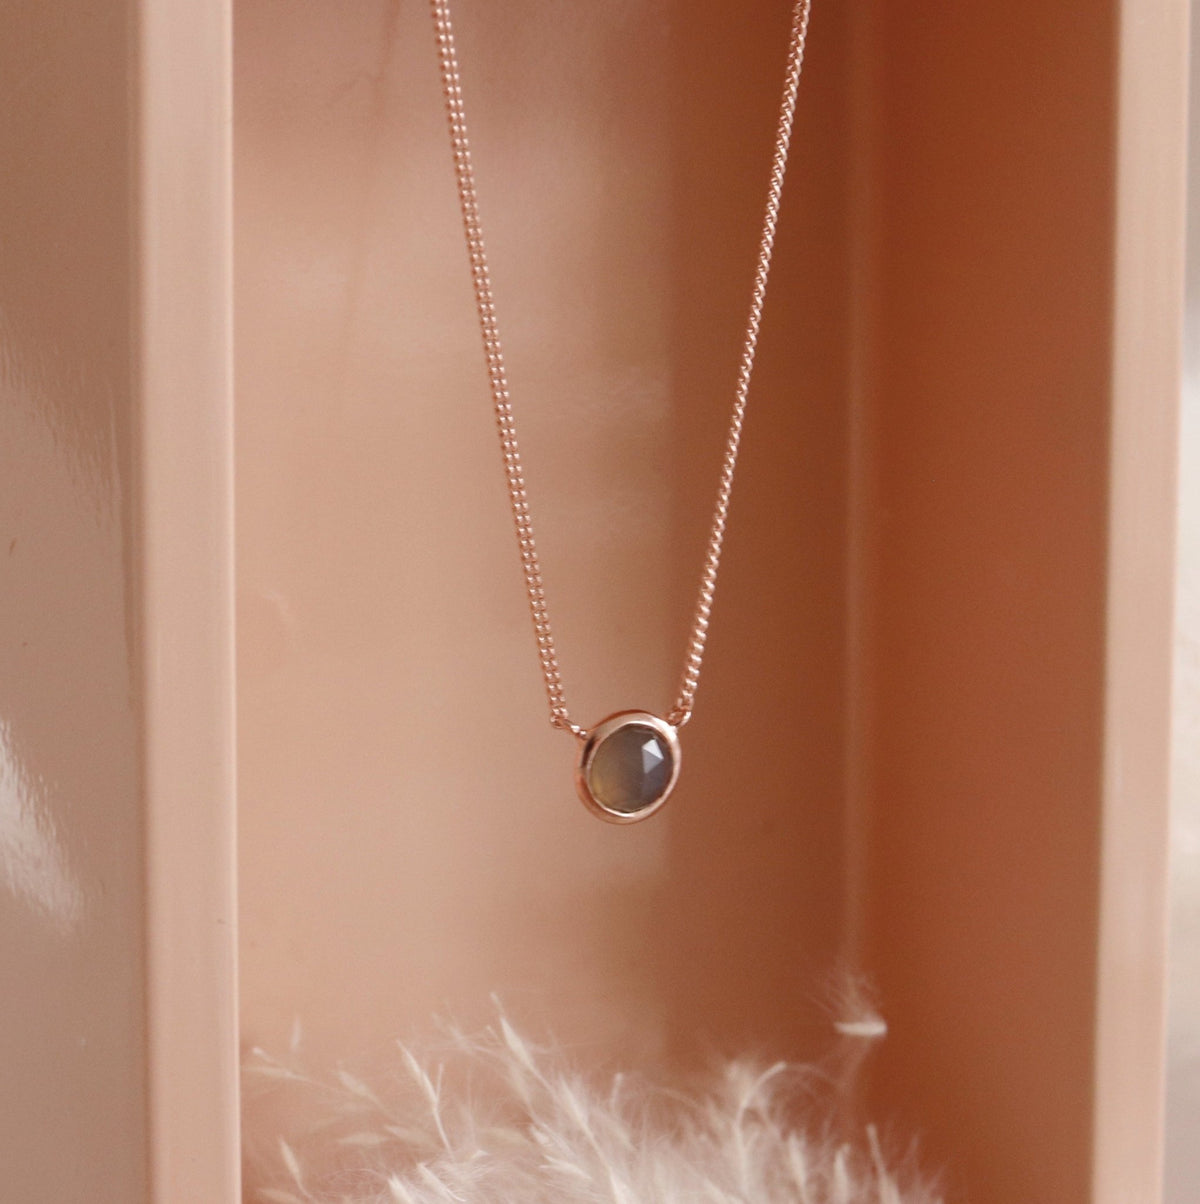 DAINTY LEGACY NECKLACE - GREY MOONSTONE &amp; ROSE GOLD - SO PRETTY CARA COTTER